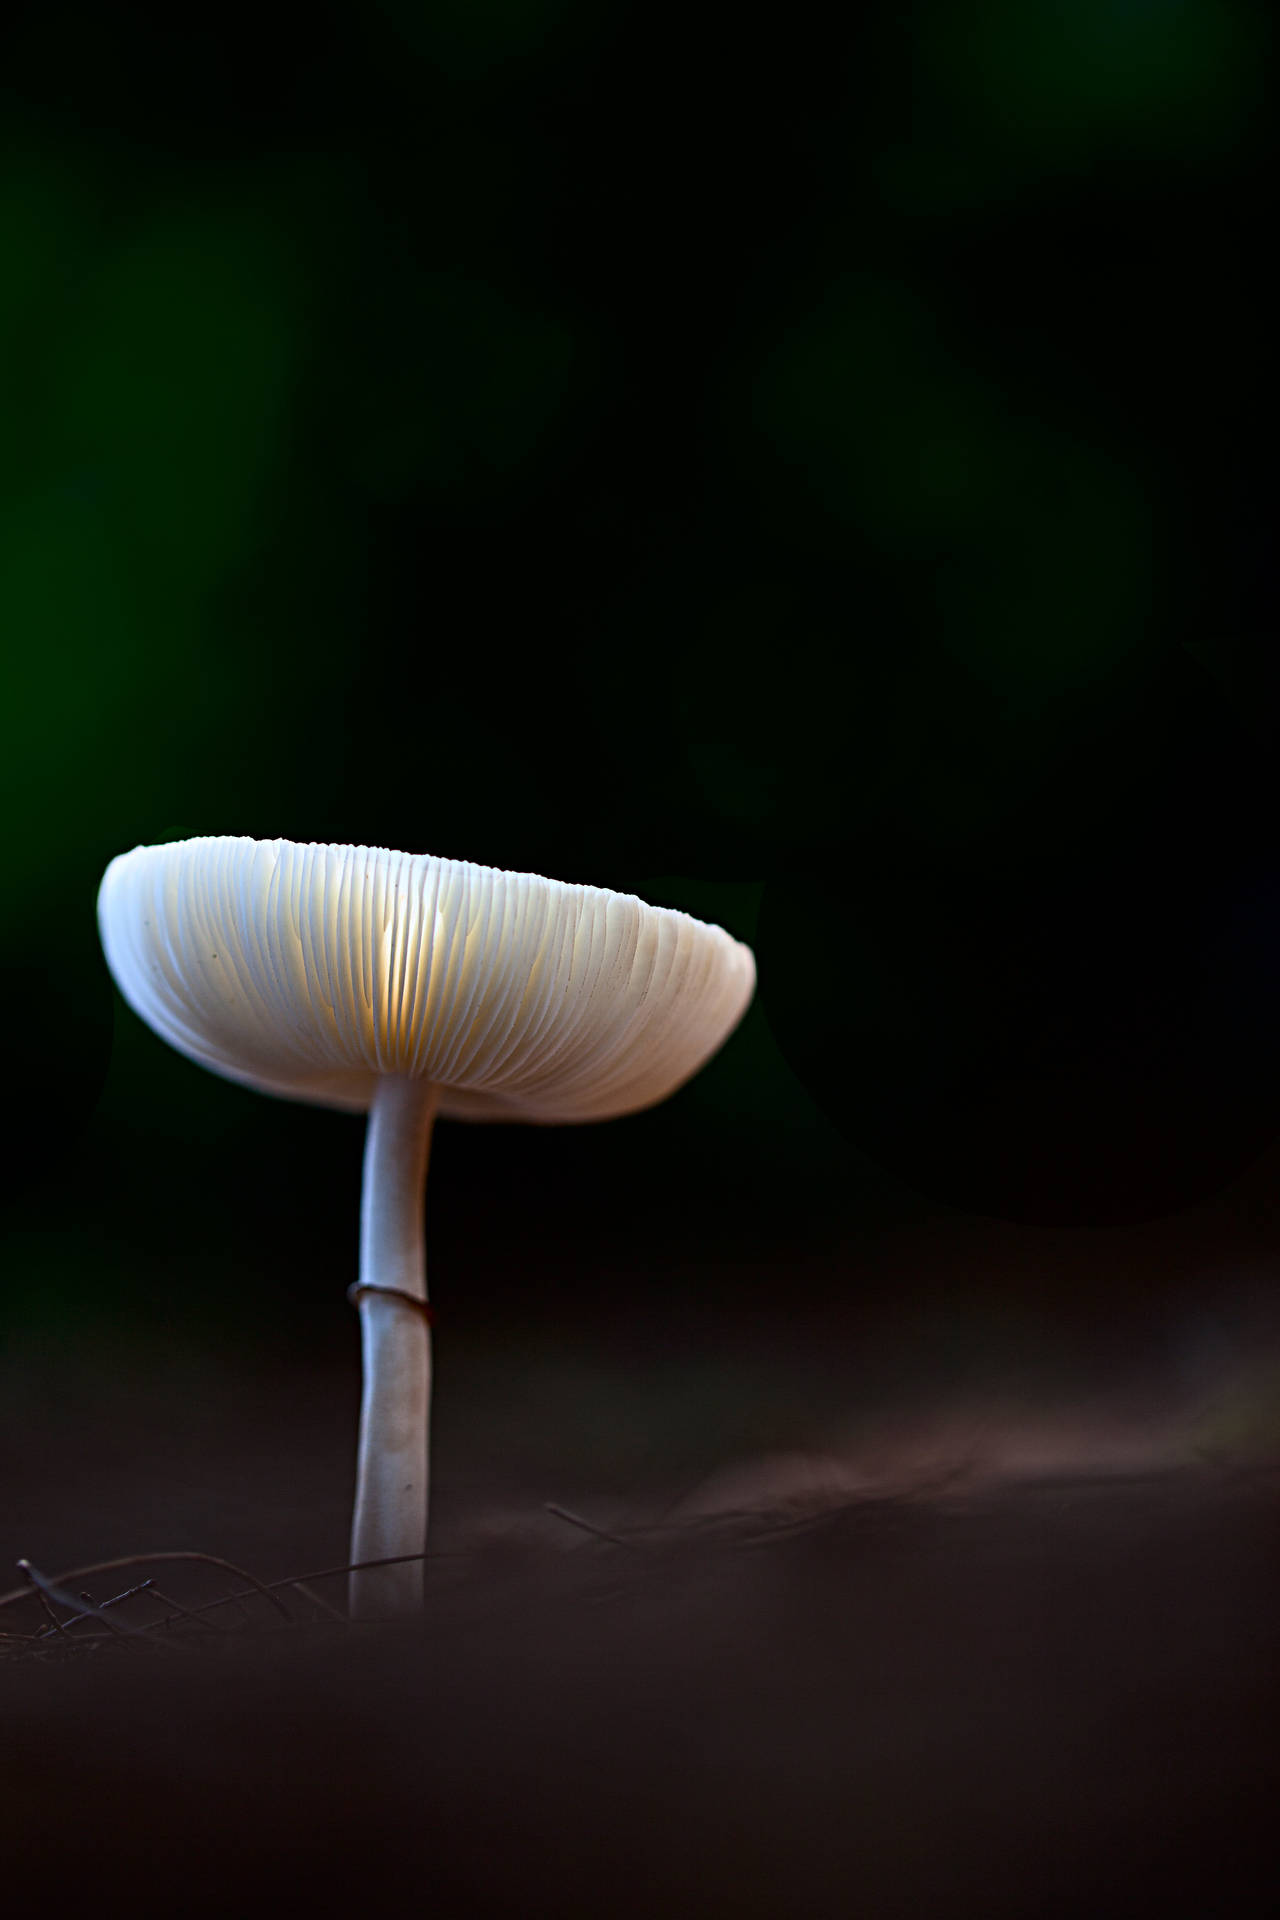 Mushroom 2667X4000 Wallpaper and Background Image